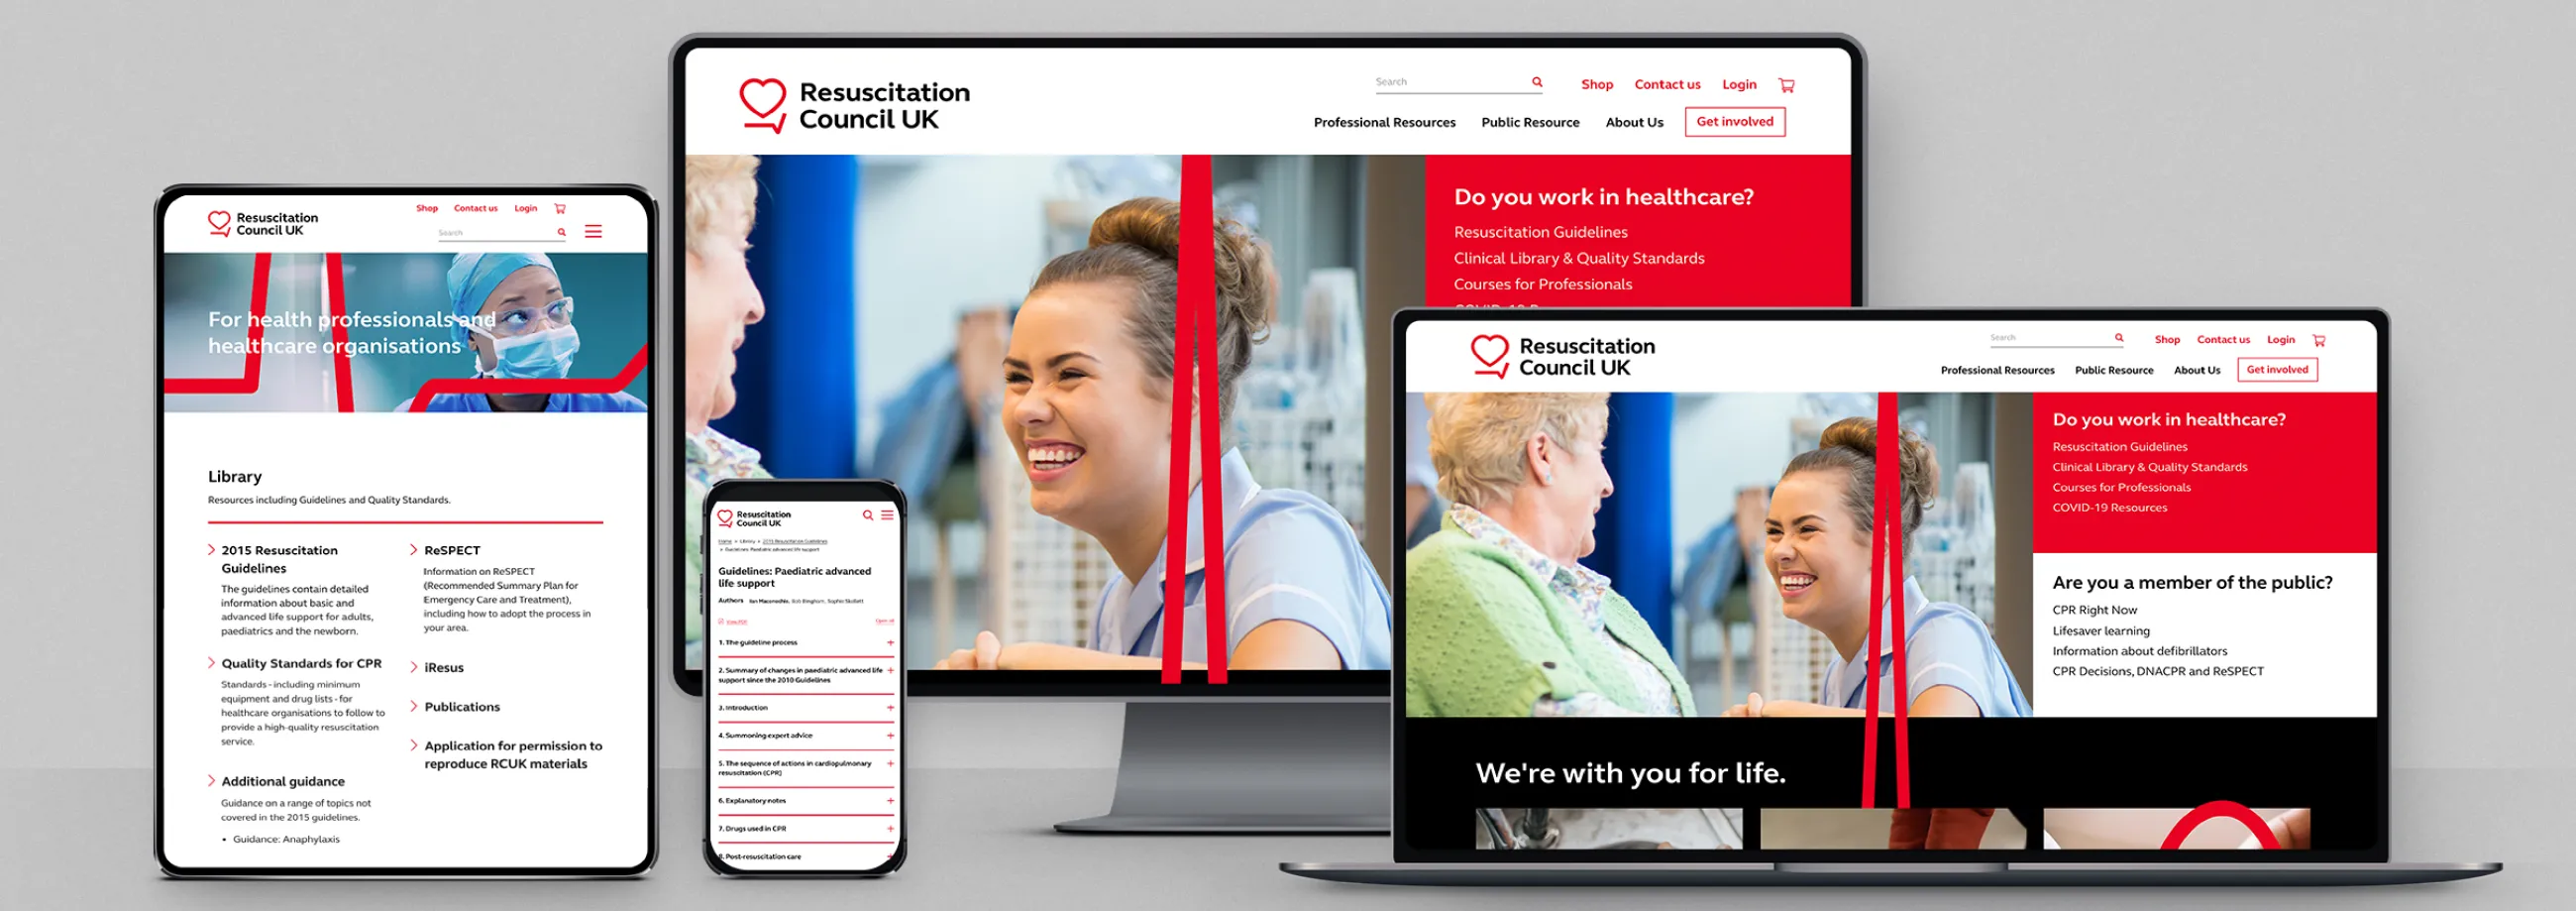 Resuscitation Council UK website shown on various devices